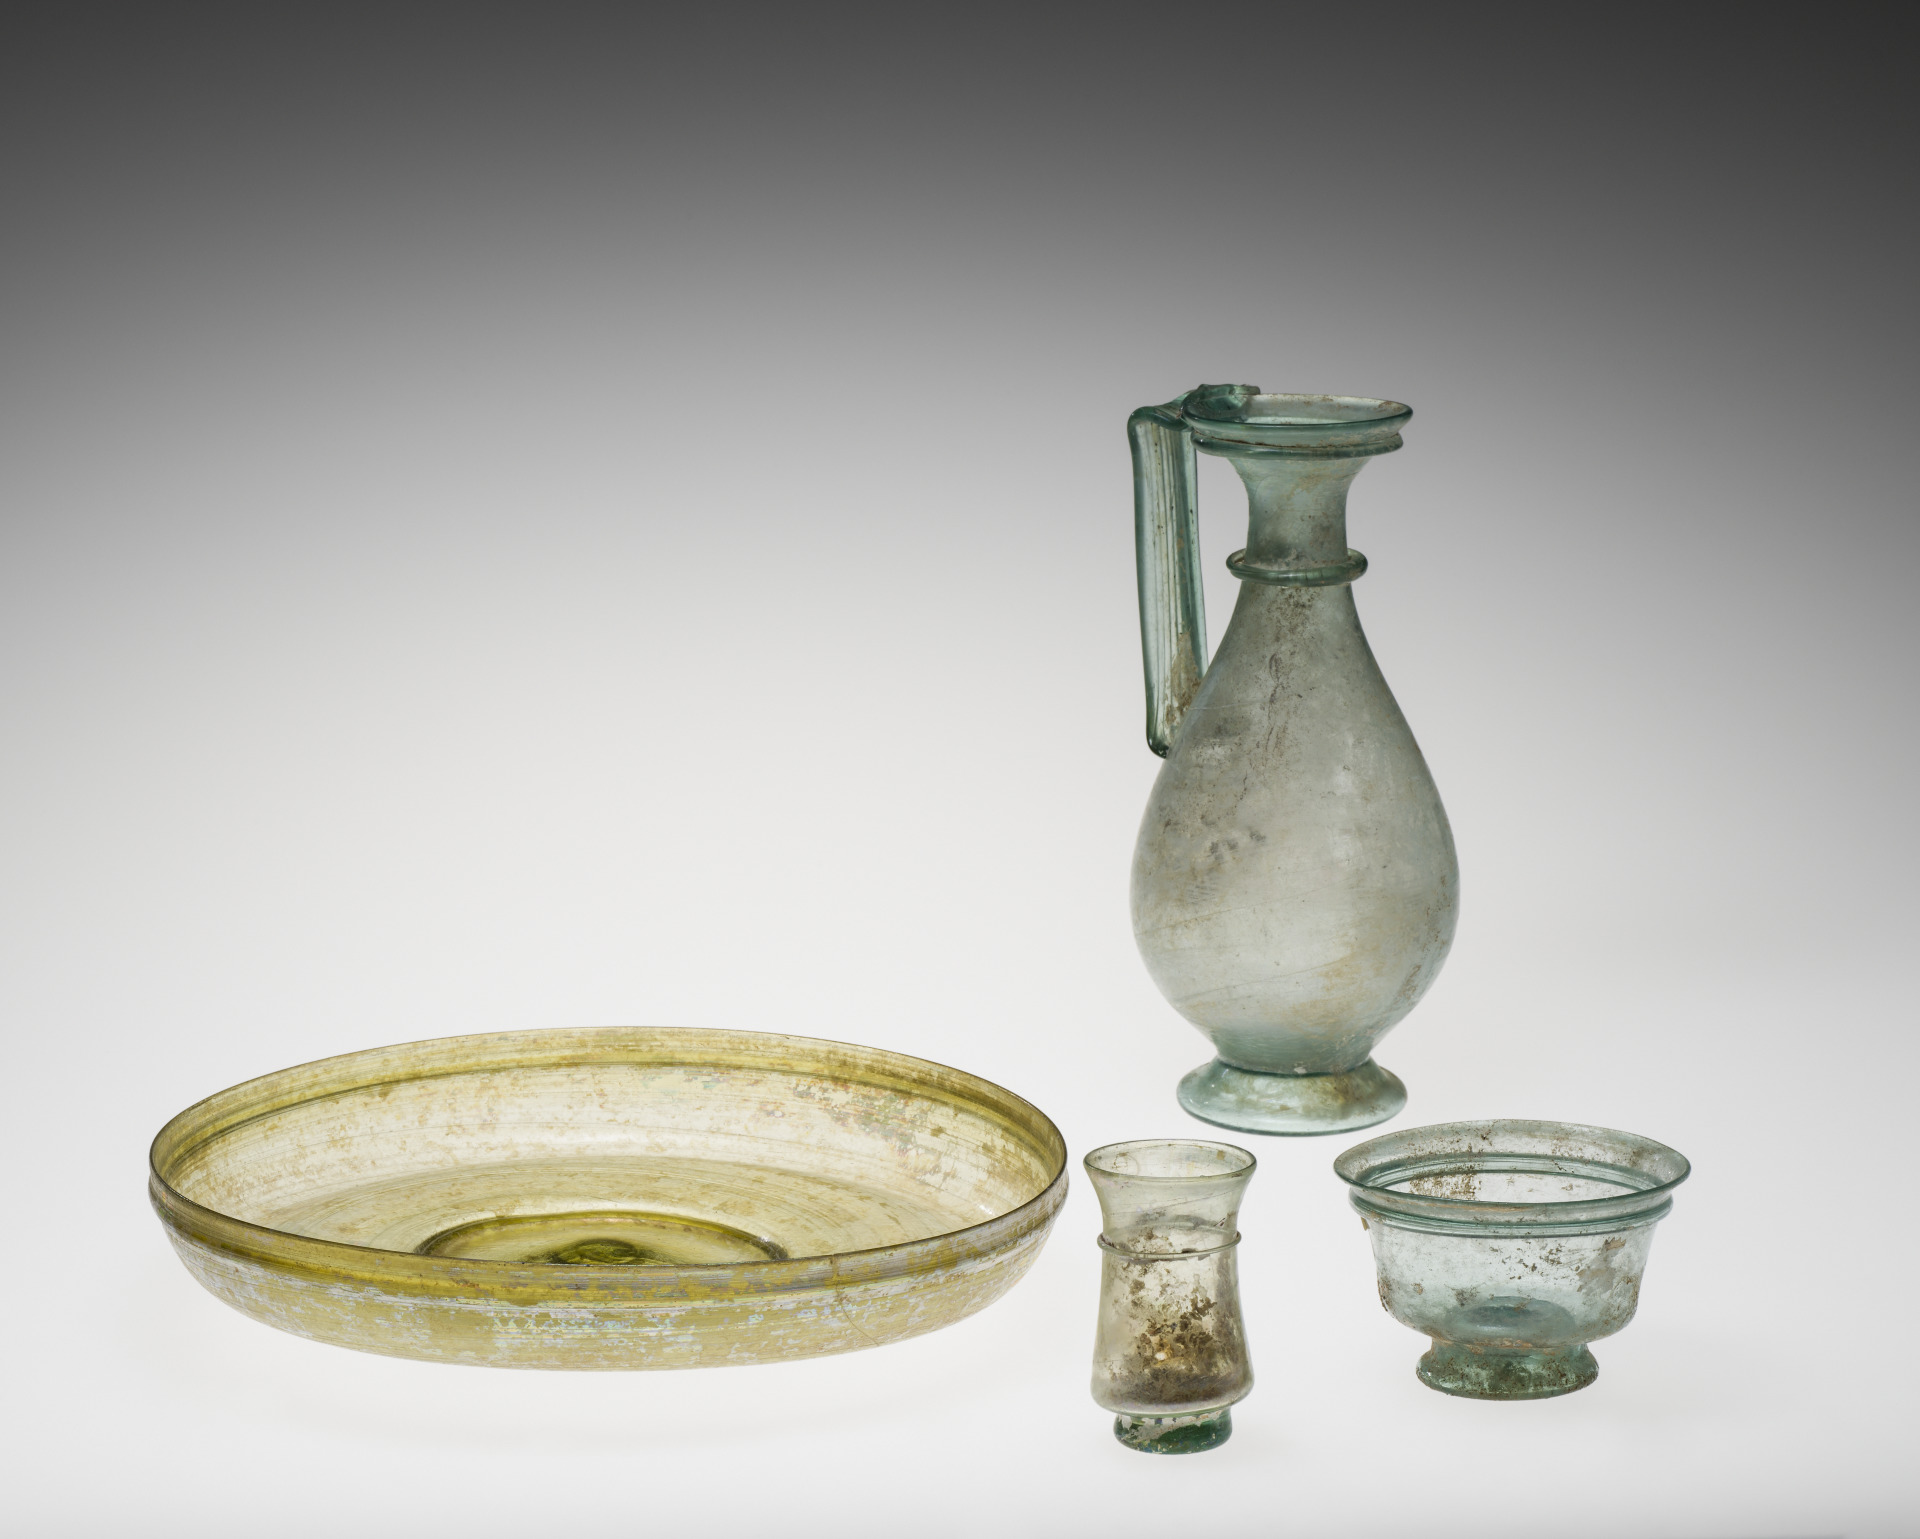 Dig Deeper: Discovering an Ancient Glass Workshop